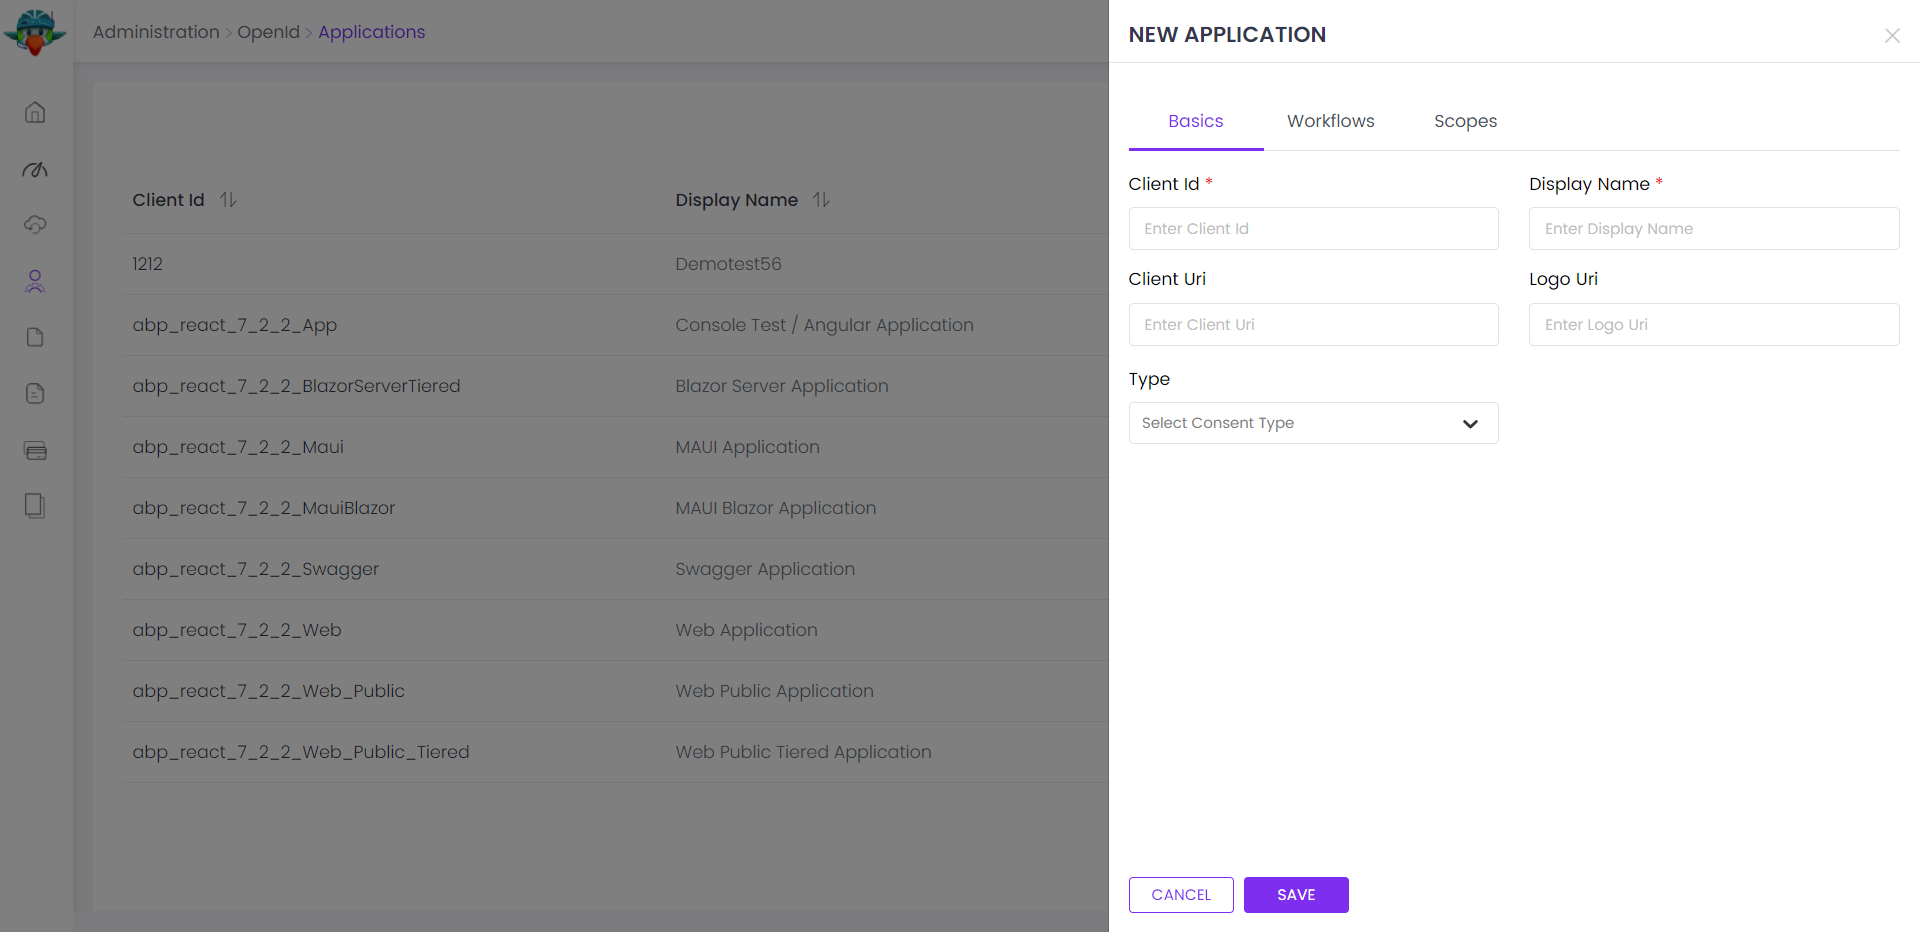 create new application or edit existing applications